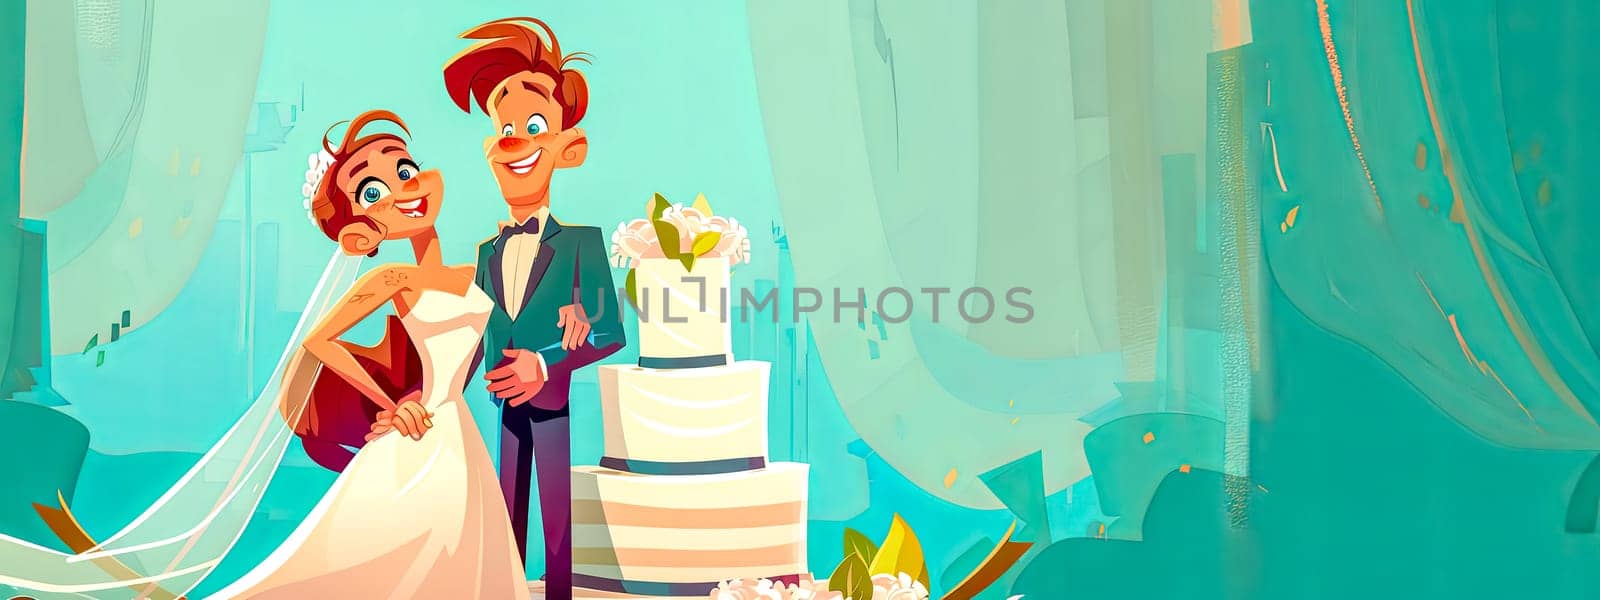 Delighted Cartoon Bride and Groom with Wedding Cake by Edophoto